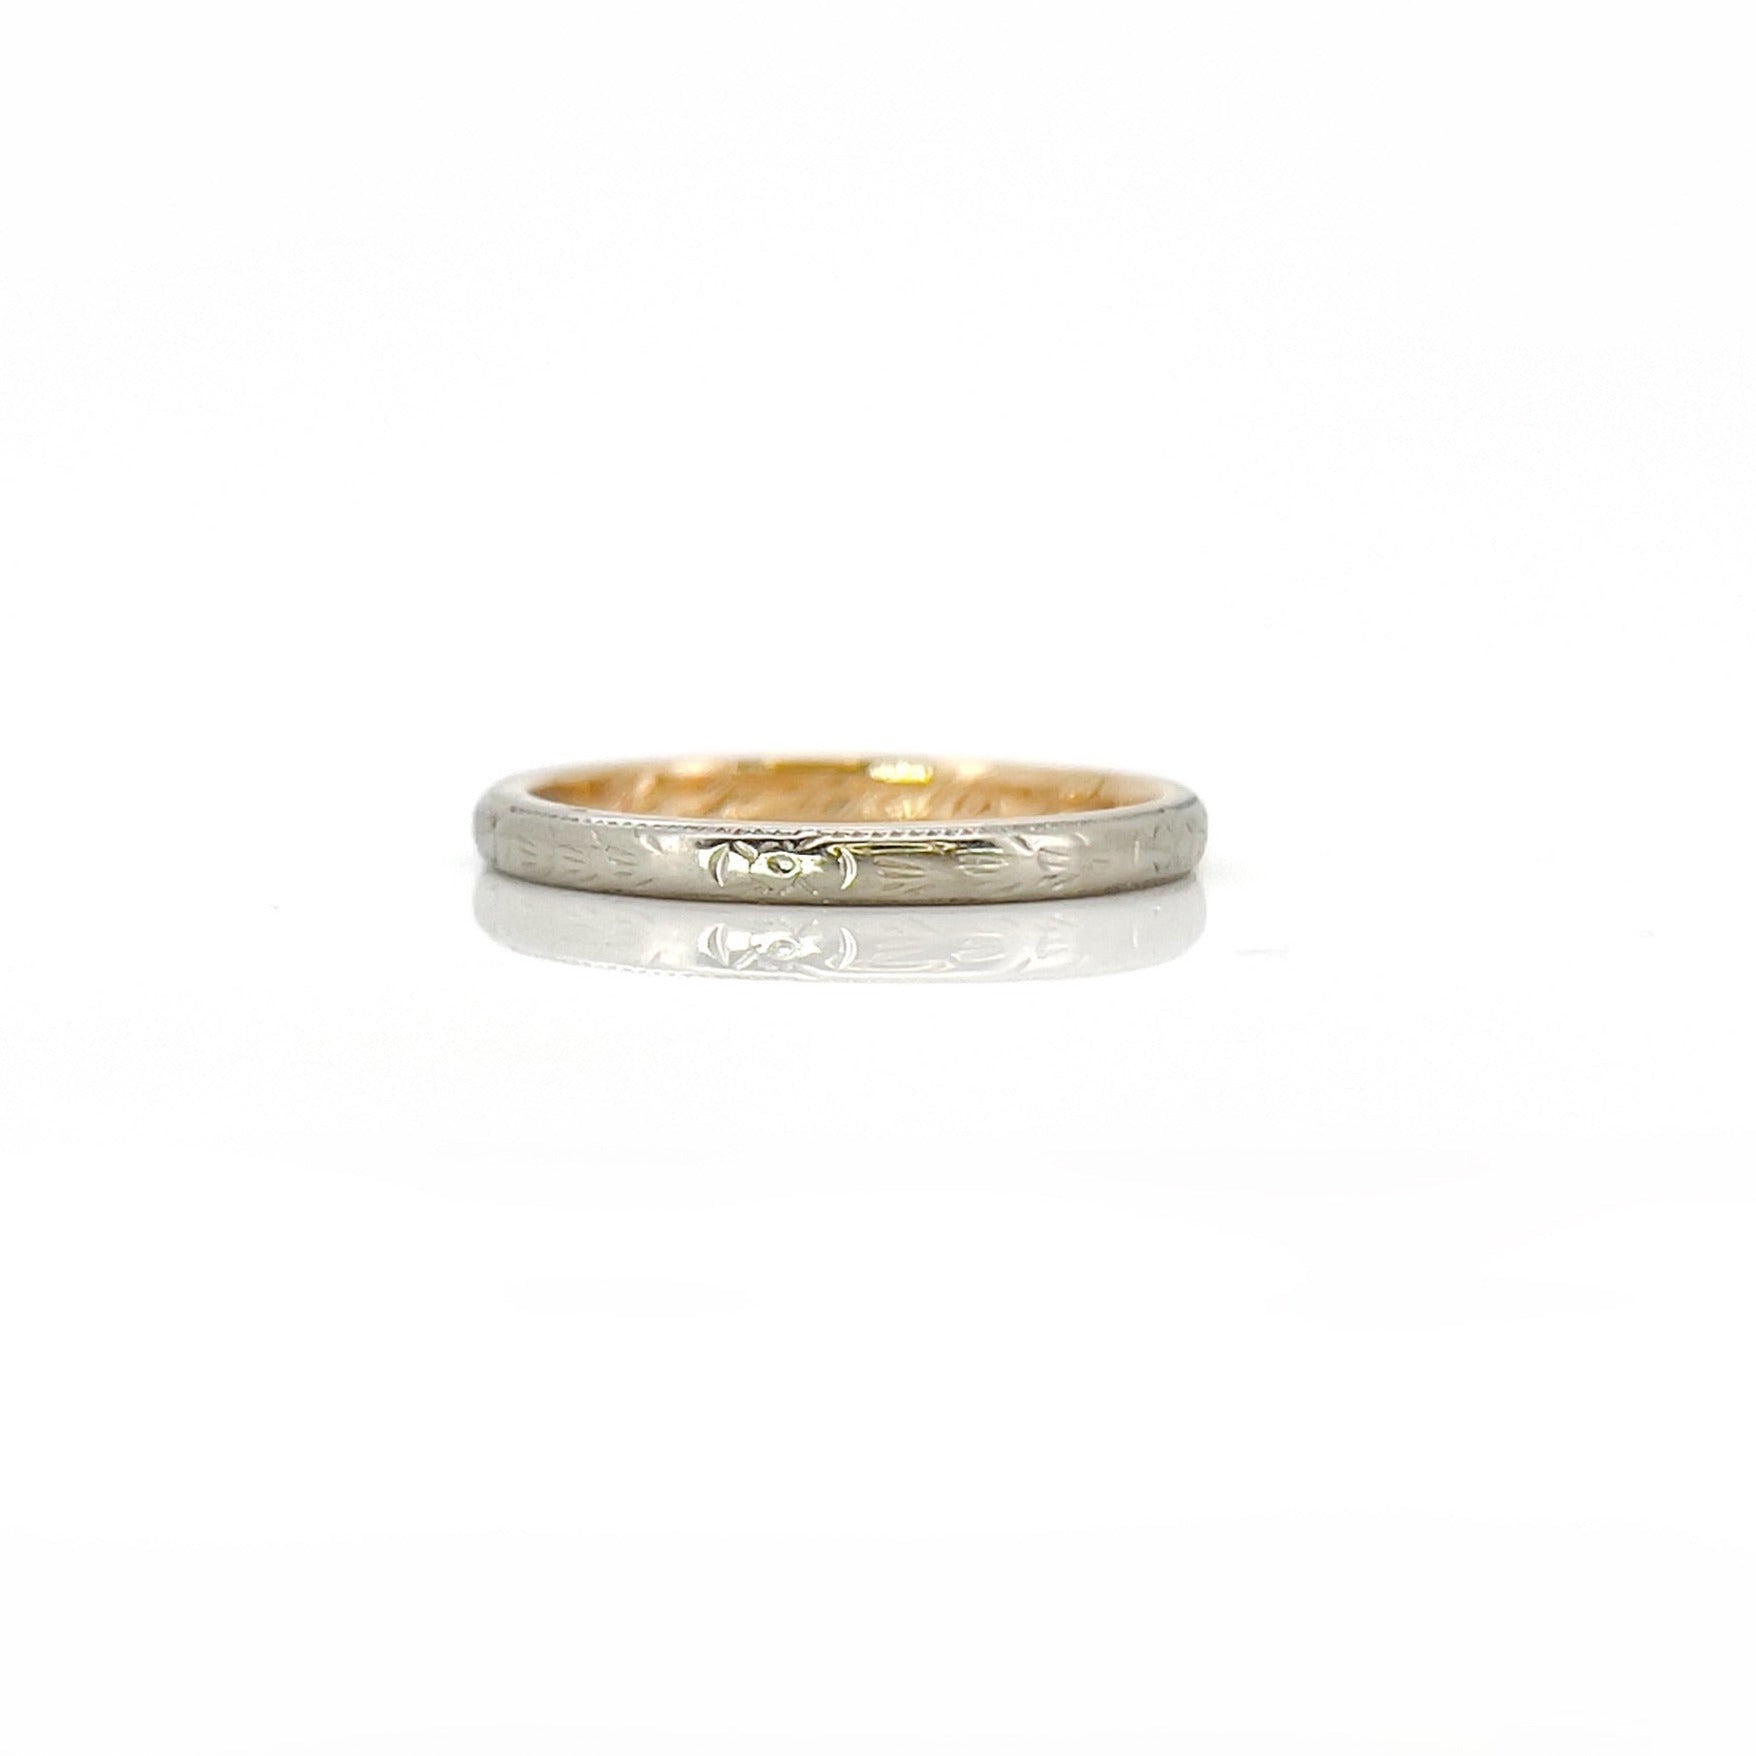 JR Wood Two Tone Eternity Ring, "R.J to M.V," 14K, Size 8